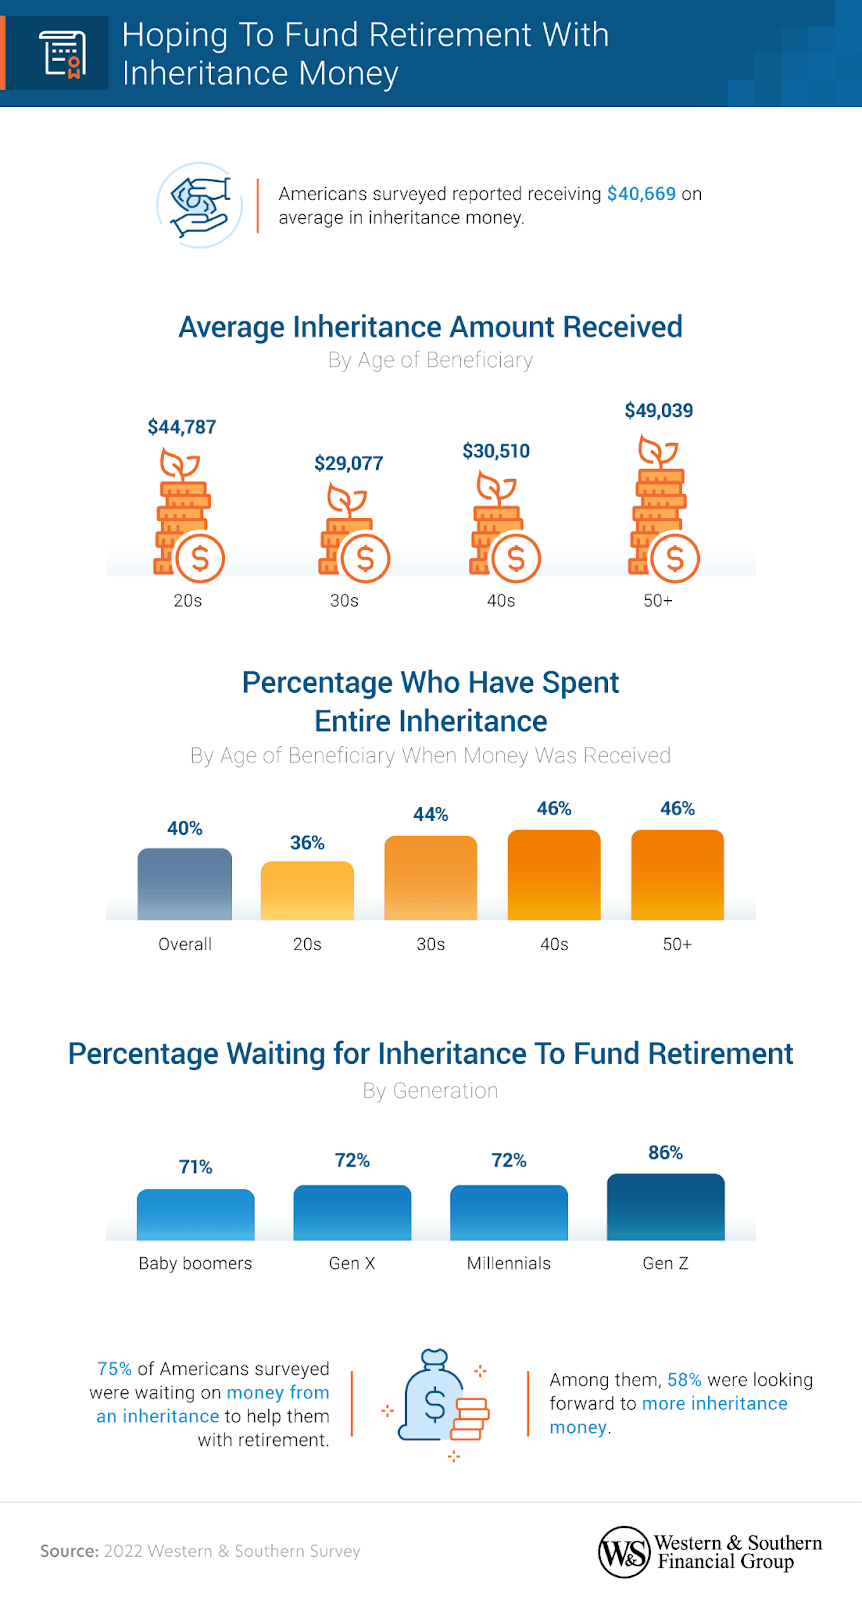 The average inheritance amount received for someone who is in their 40s is $30,510.